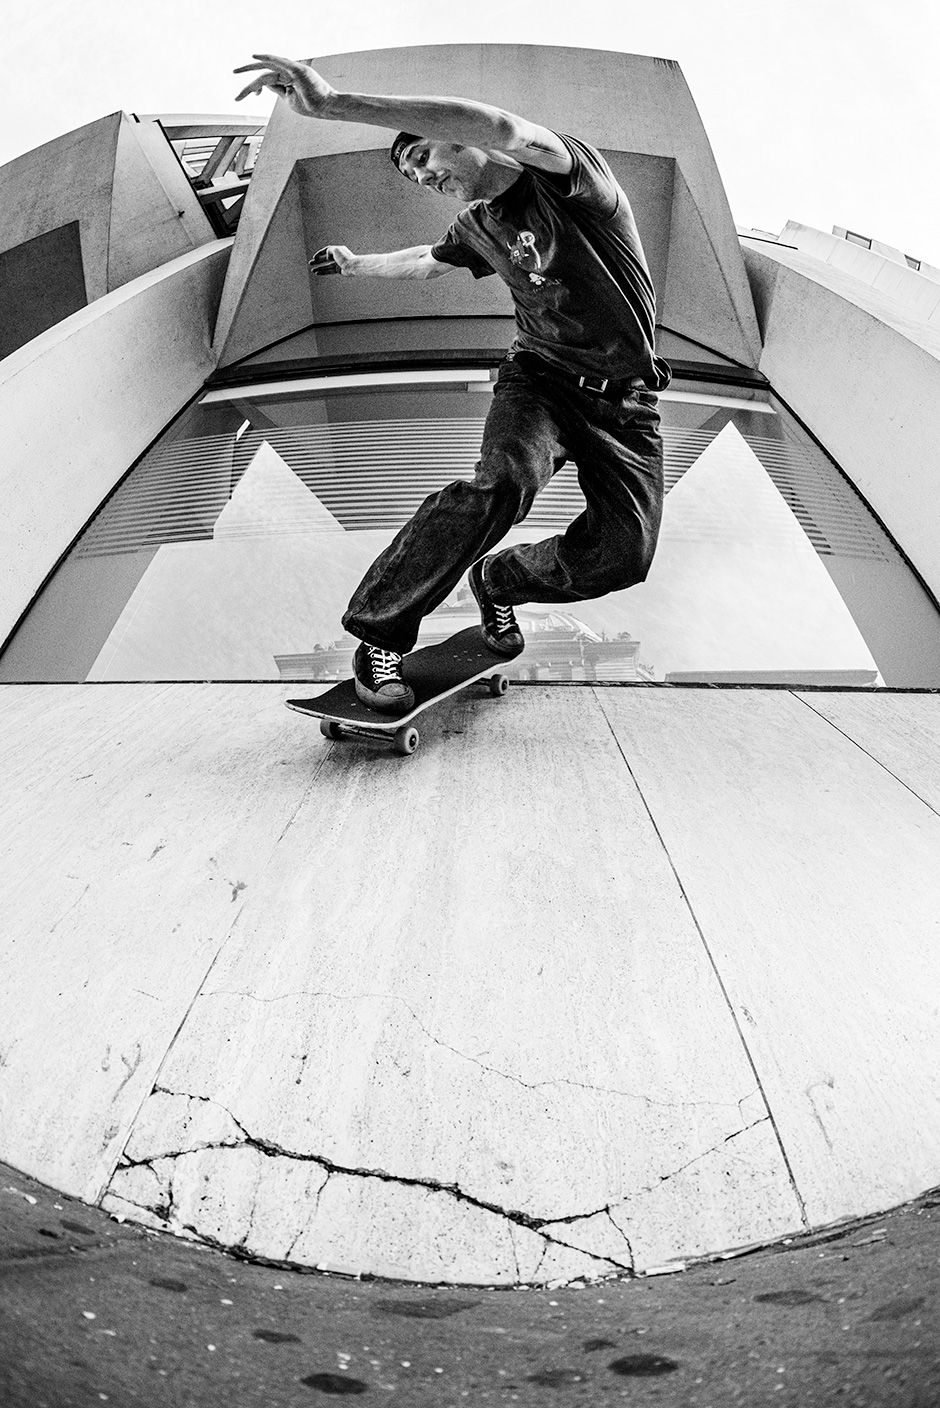 Billy Trick does a backside slas while out and about, Rich West enjoys the freedom of no flashes to frame Billy perfectly